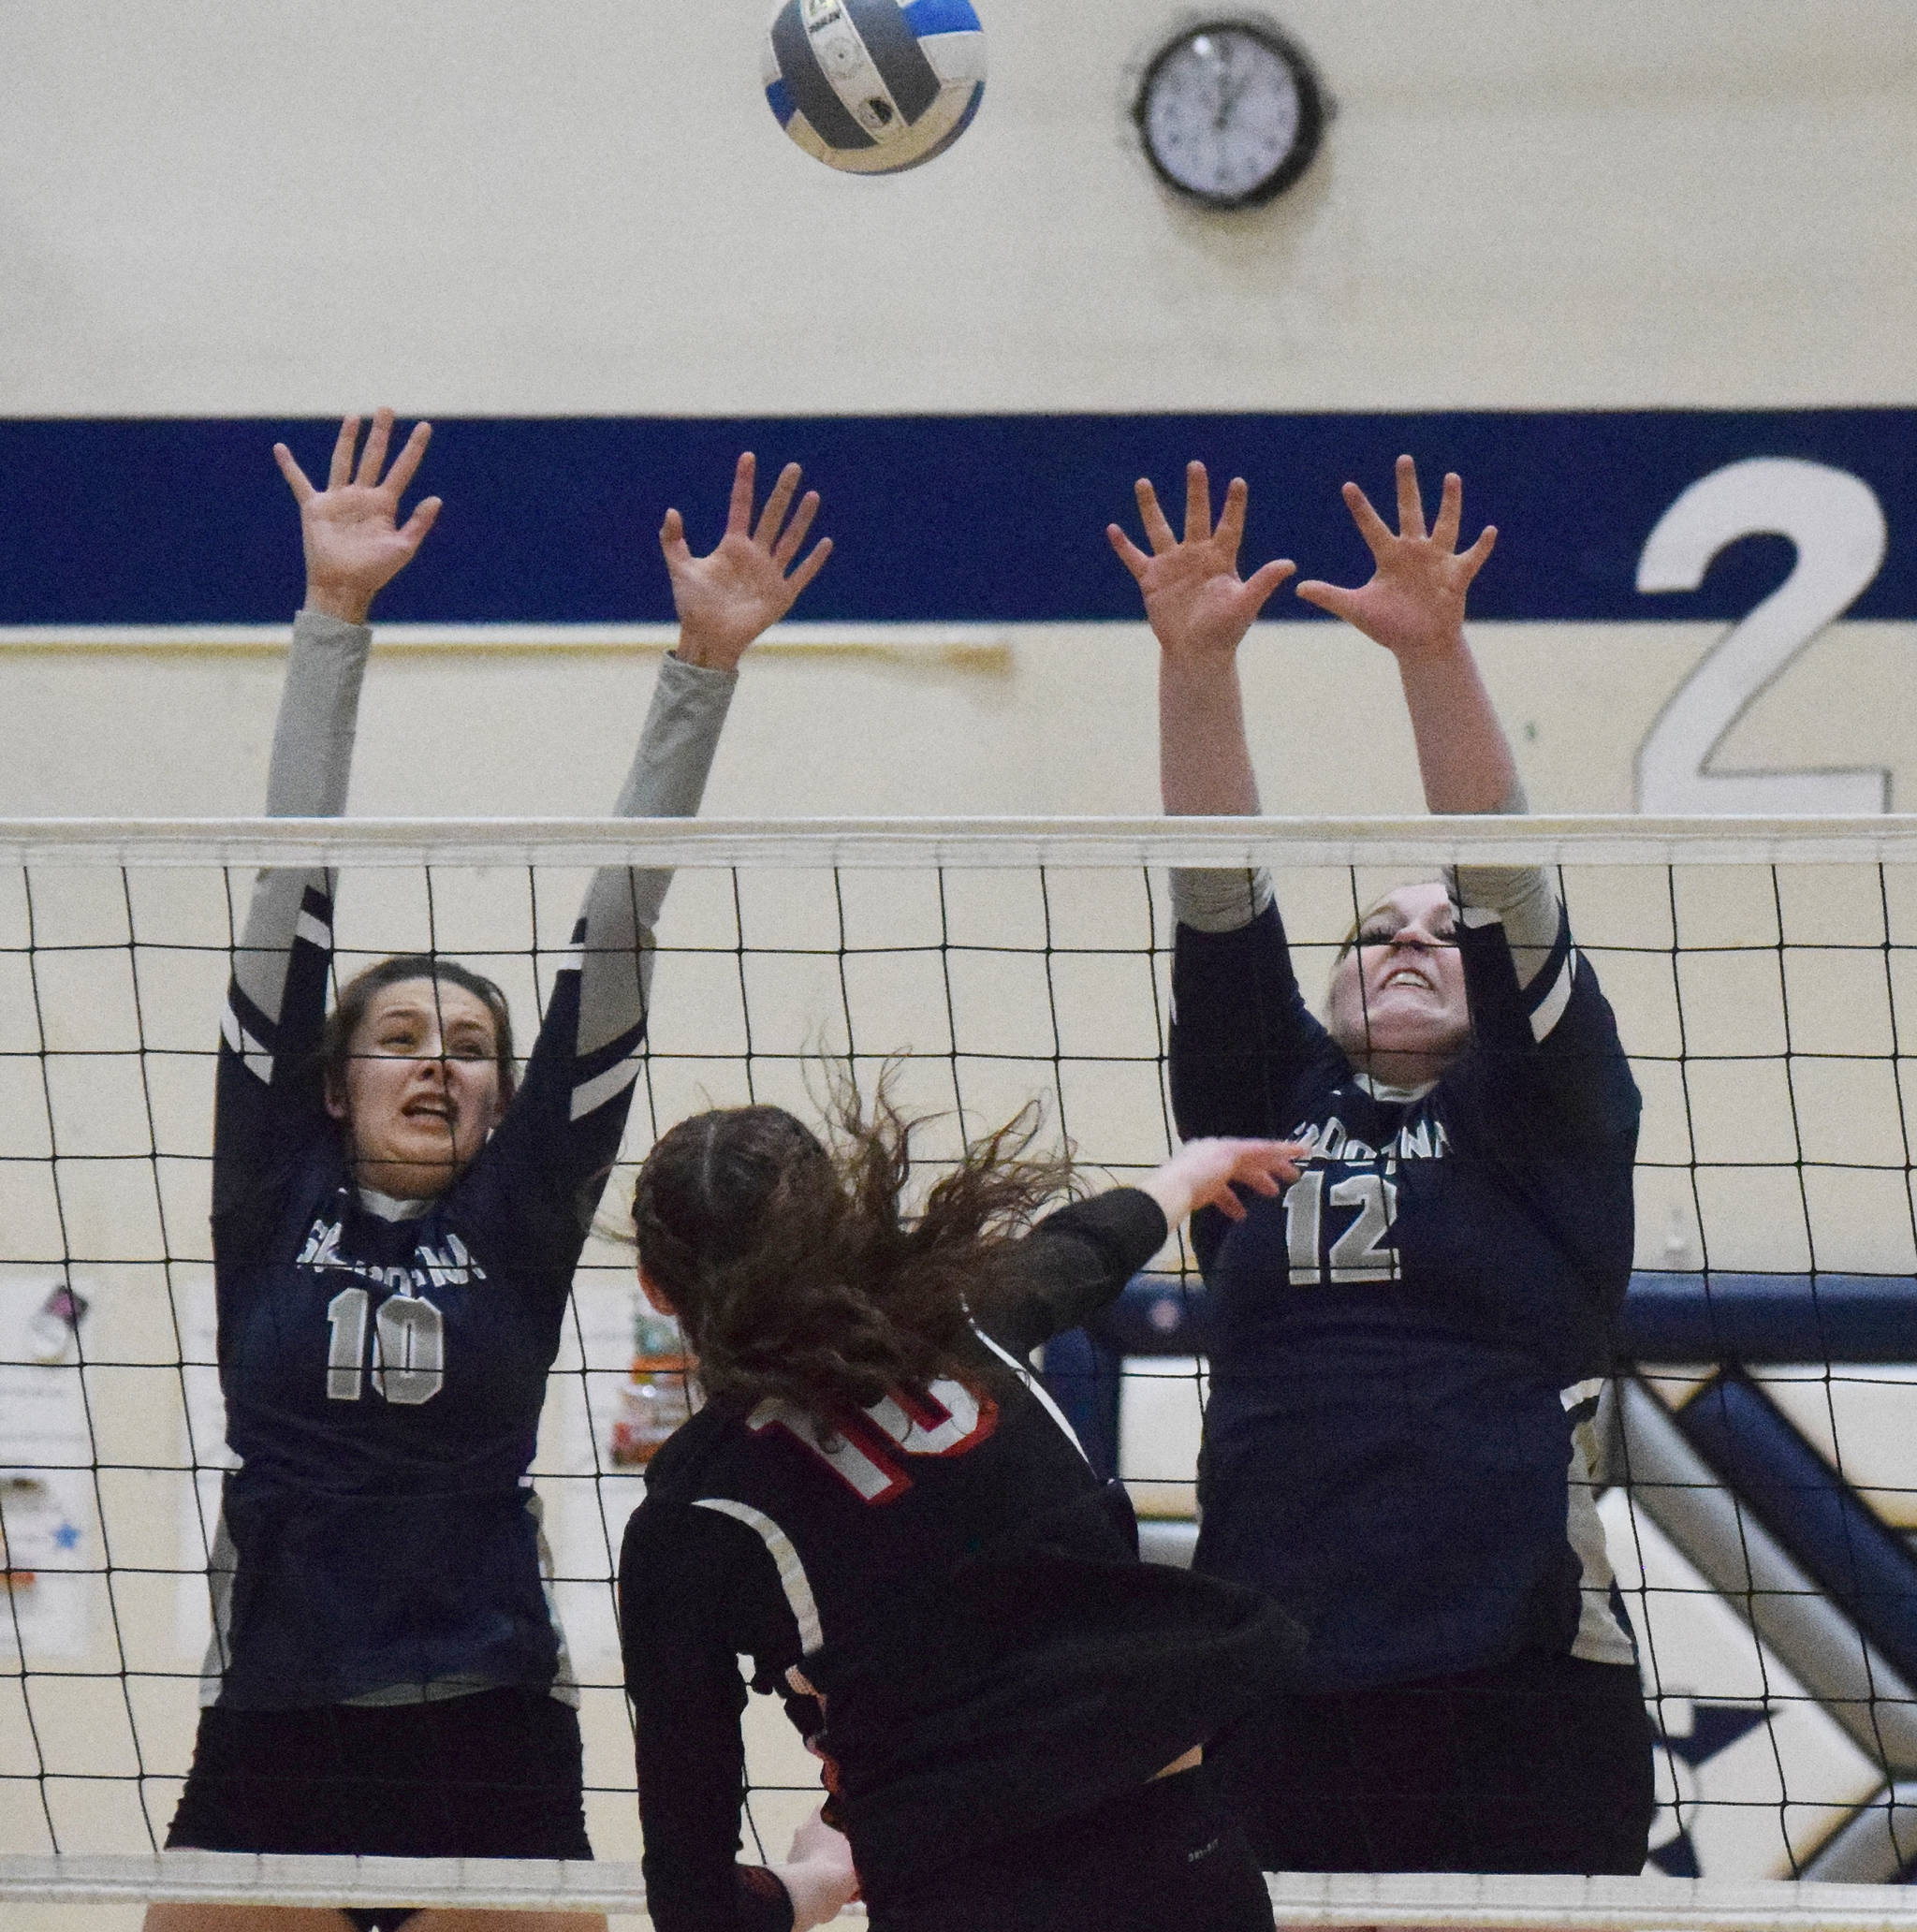 Soldotna’s Trayce Lyon and Bailey Armstrong team up for a block on Kenai Central’s Abby Every, Friday, Oct. 18, 2019, at Soldotna High School in Soldotna, Alaska. (Photo by Joey Klecka/Peninsula Clarion)